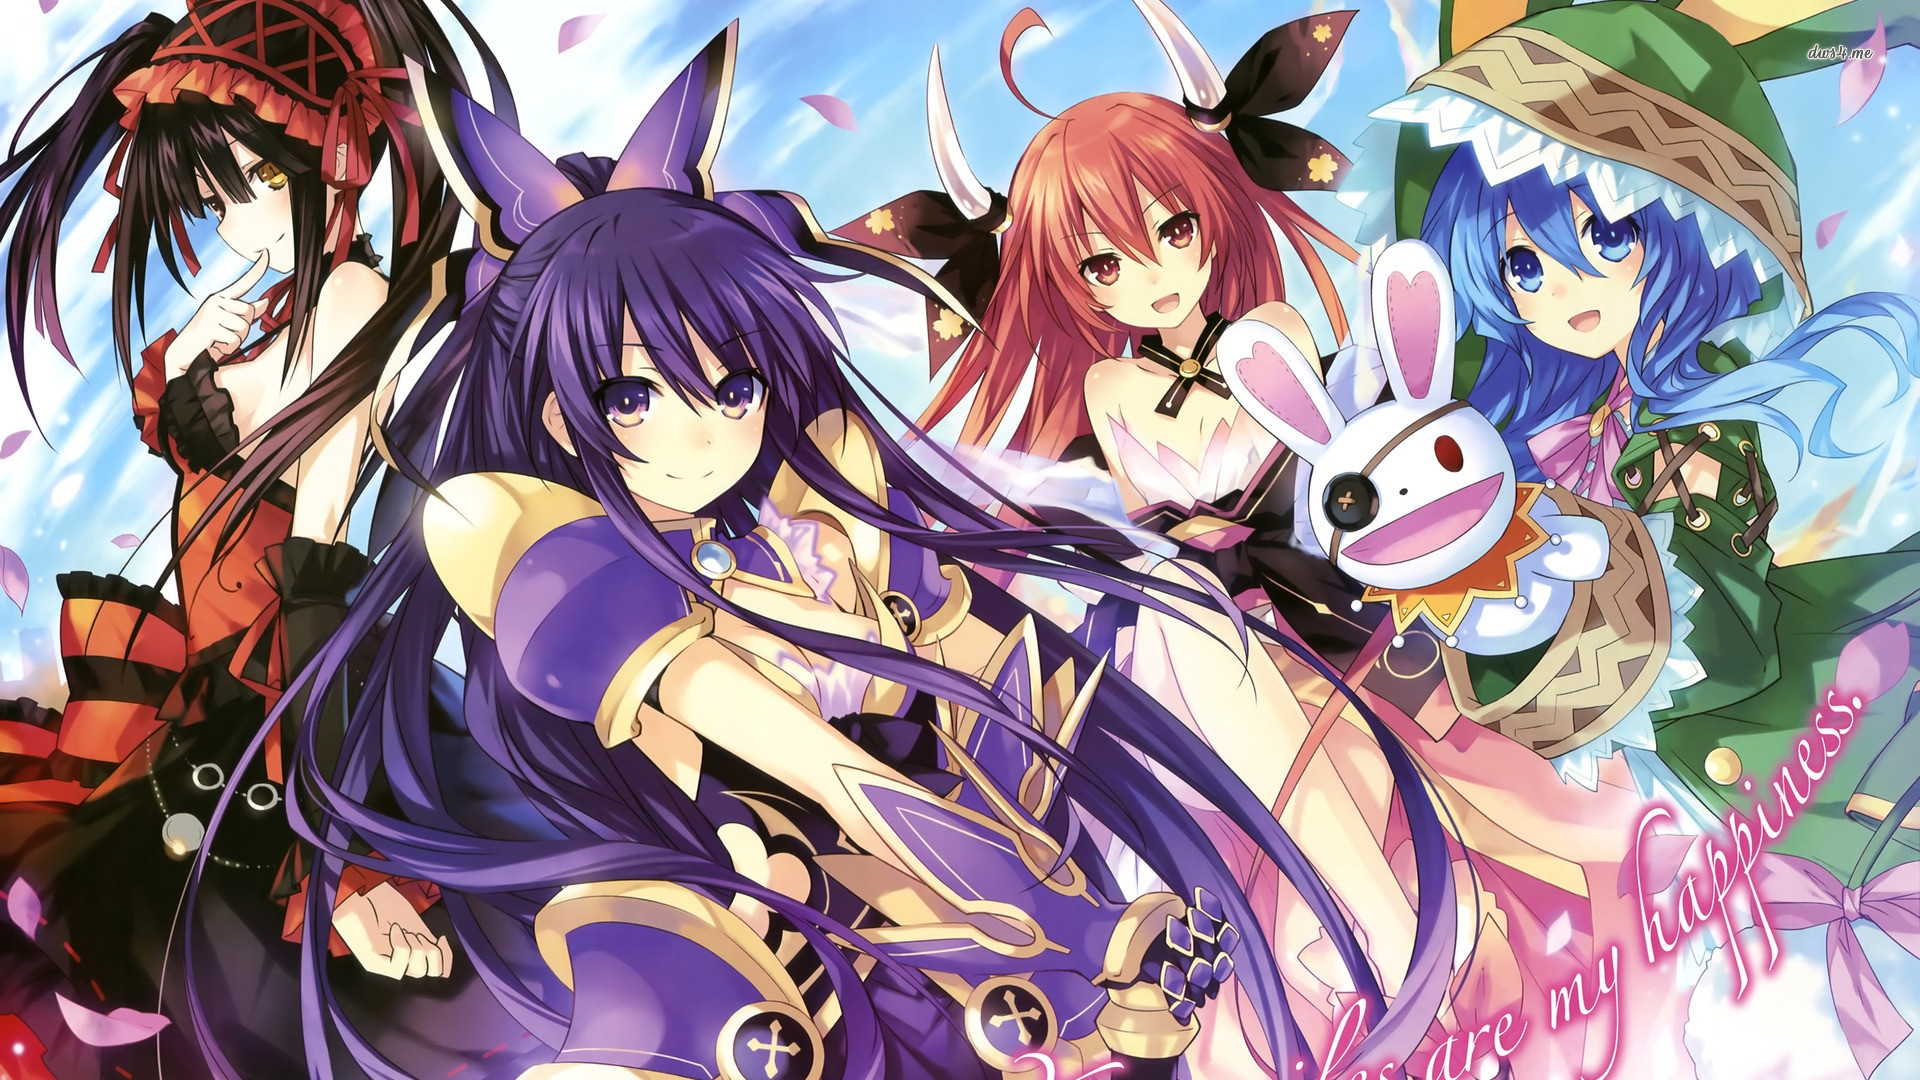 Anime Live Wallpaper Hd For Android - Date A Live - HD Wallpaper 